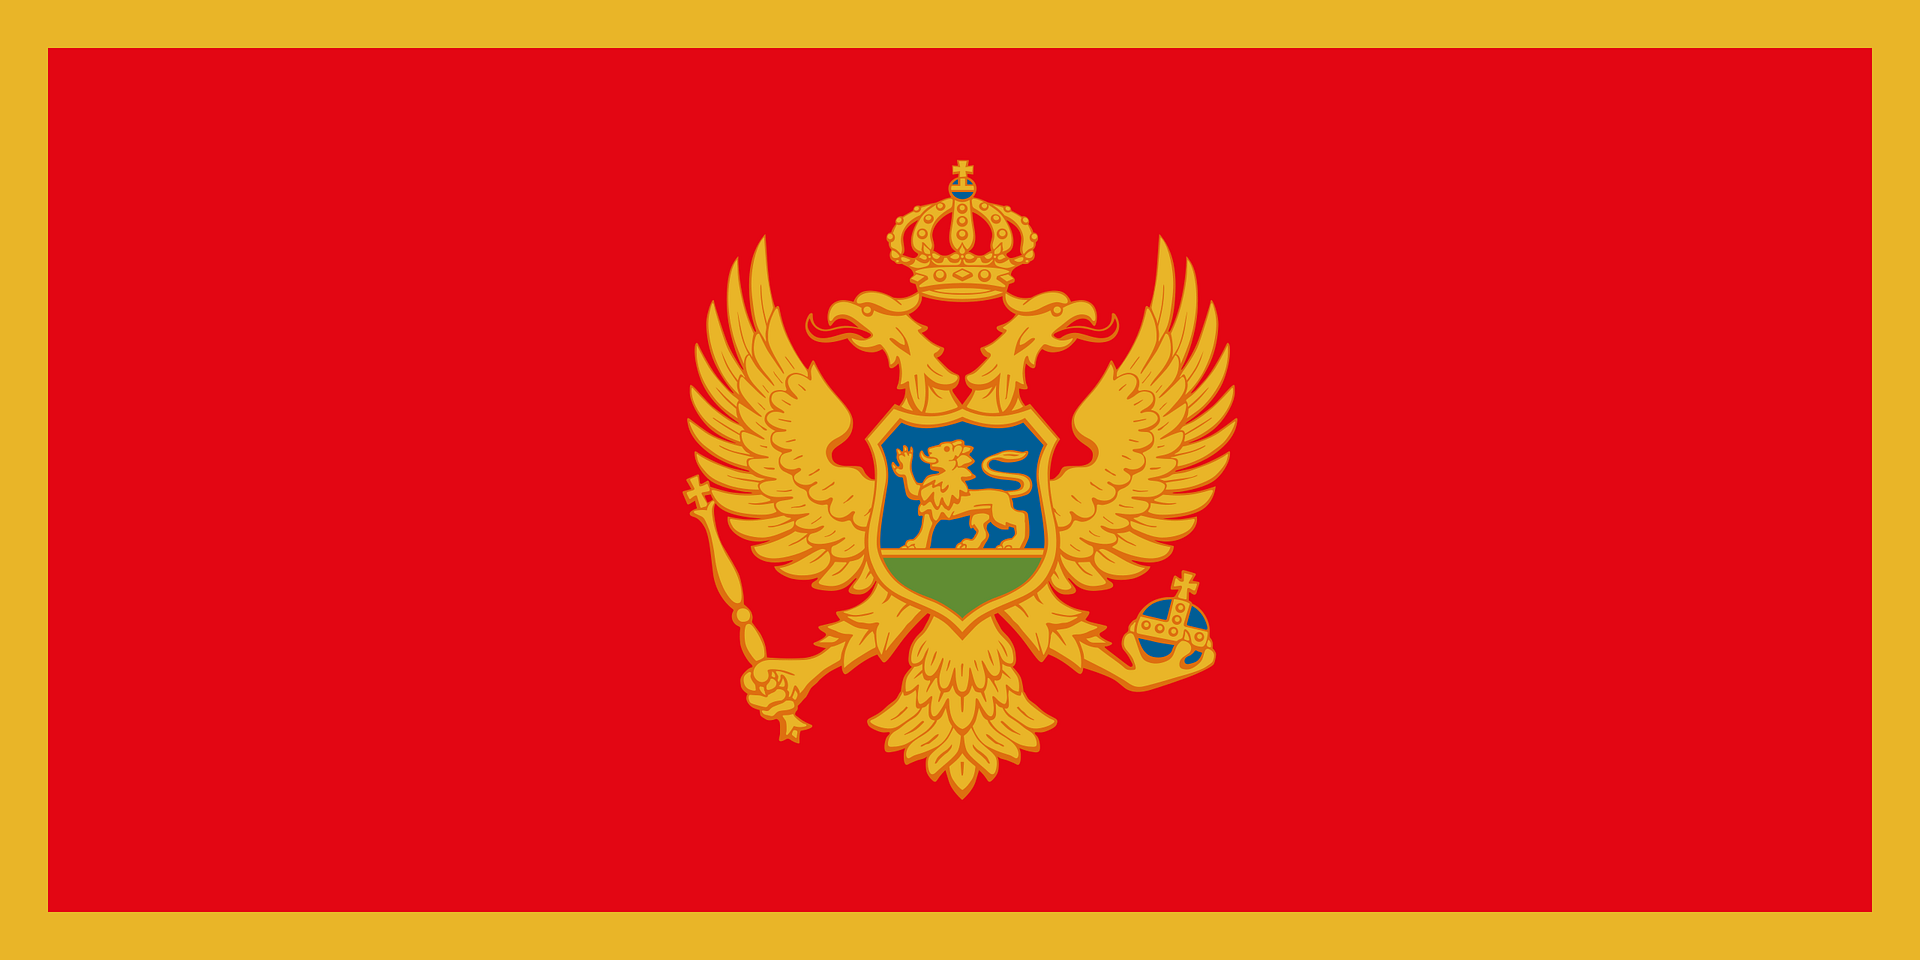 MONTENEGRO HAS ONE OF THE MOST COMPLEX FLAGS IN EUROPE